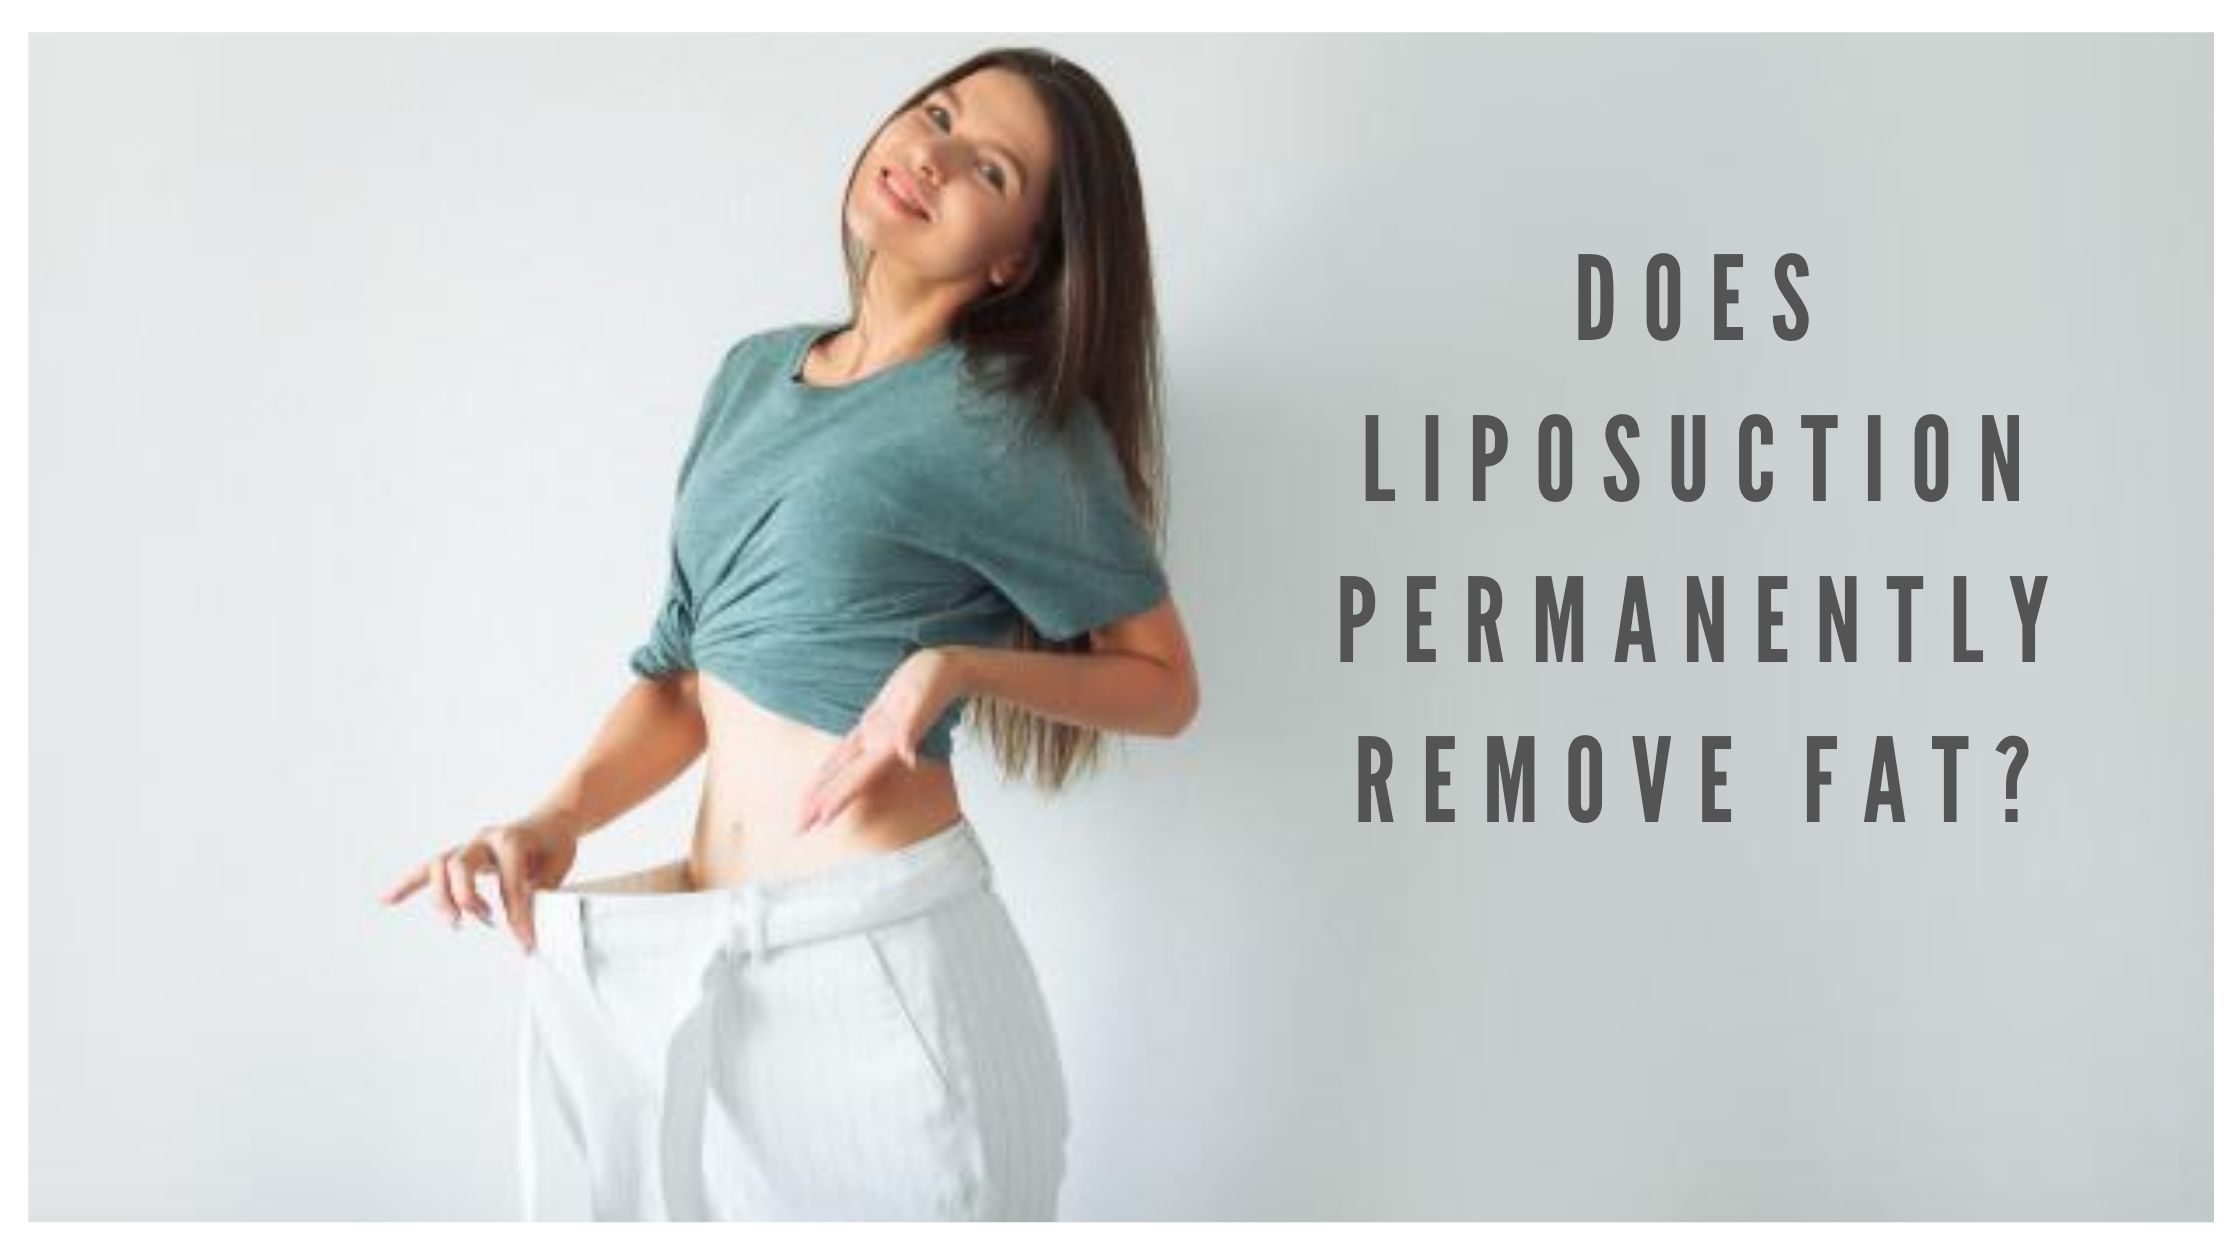 Does Liposuction permanently remove fat?